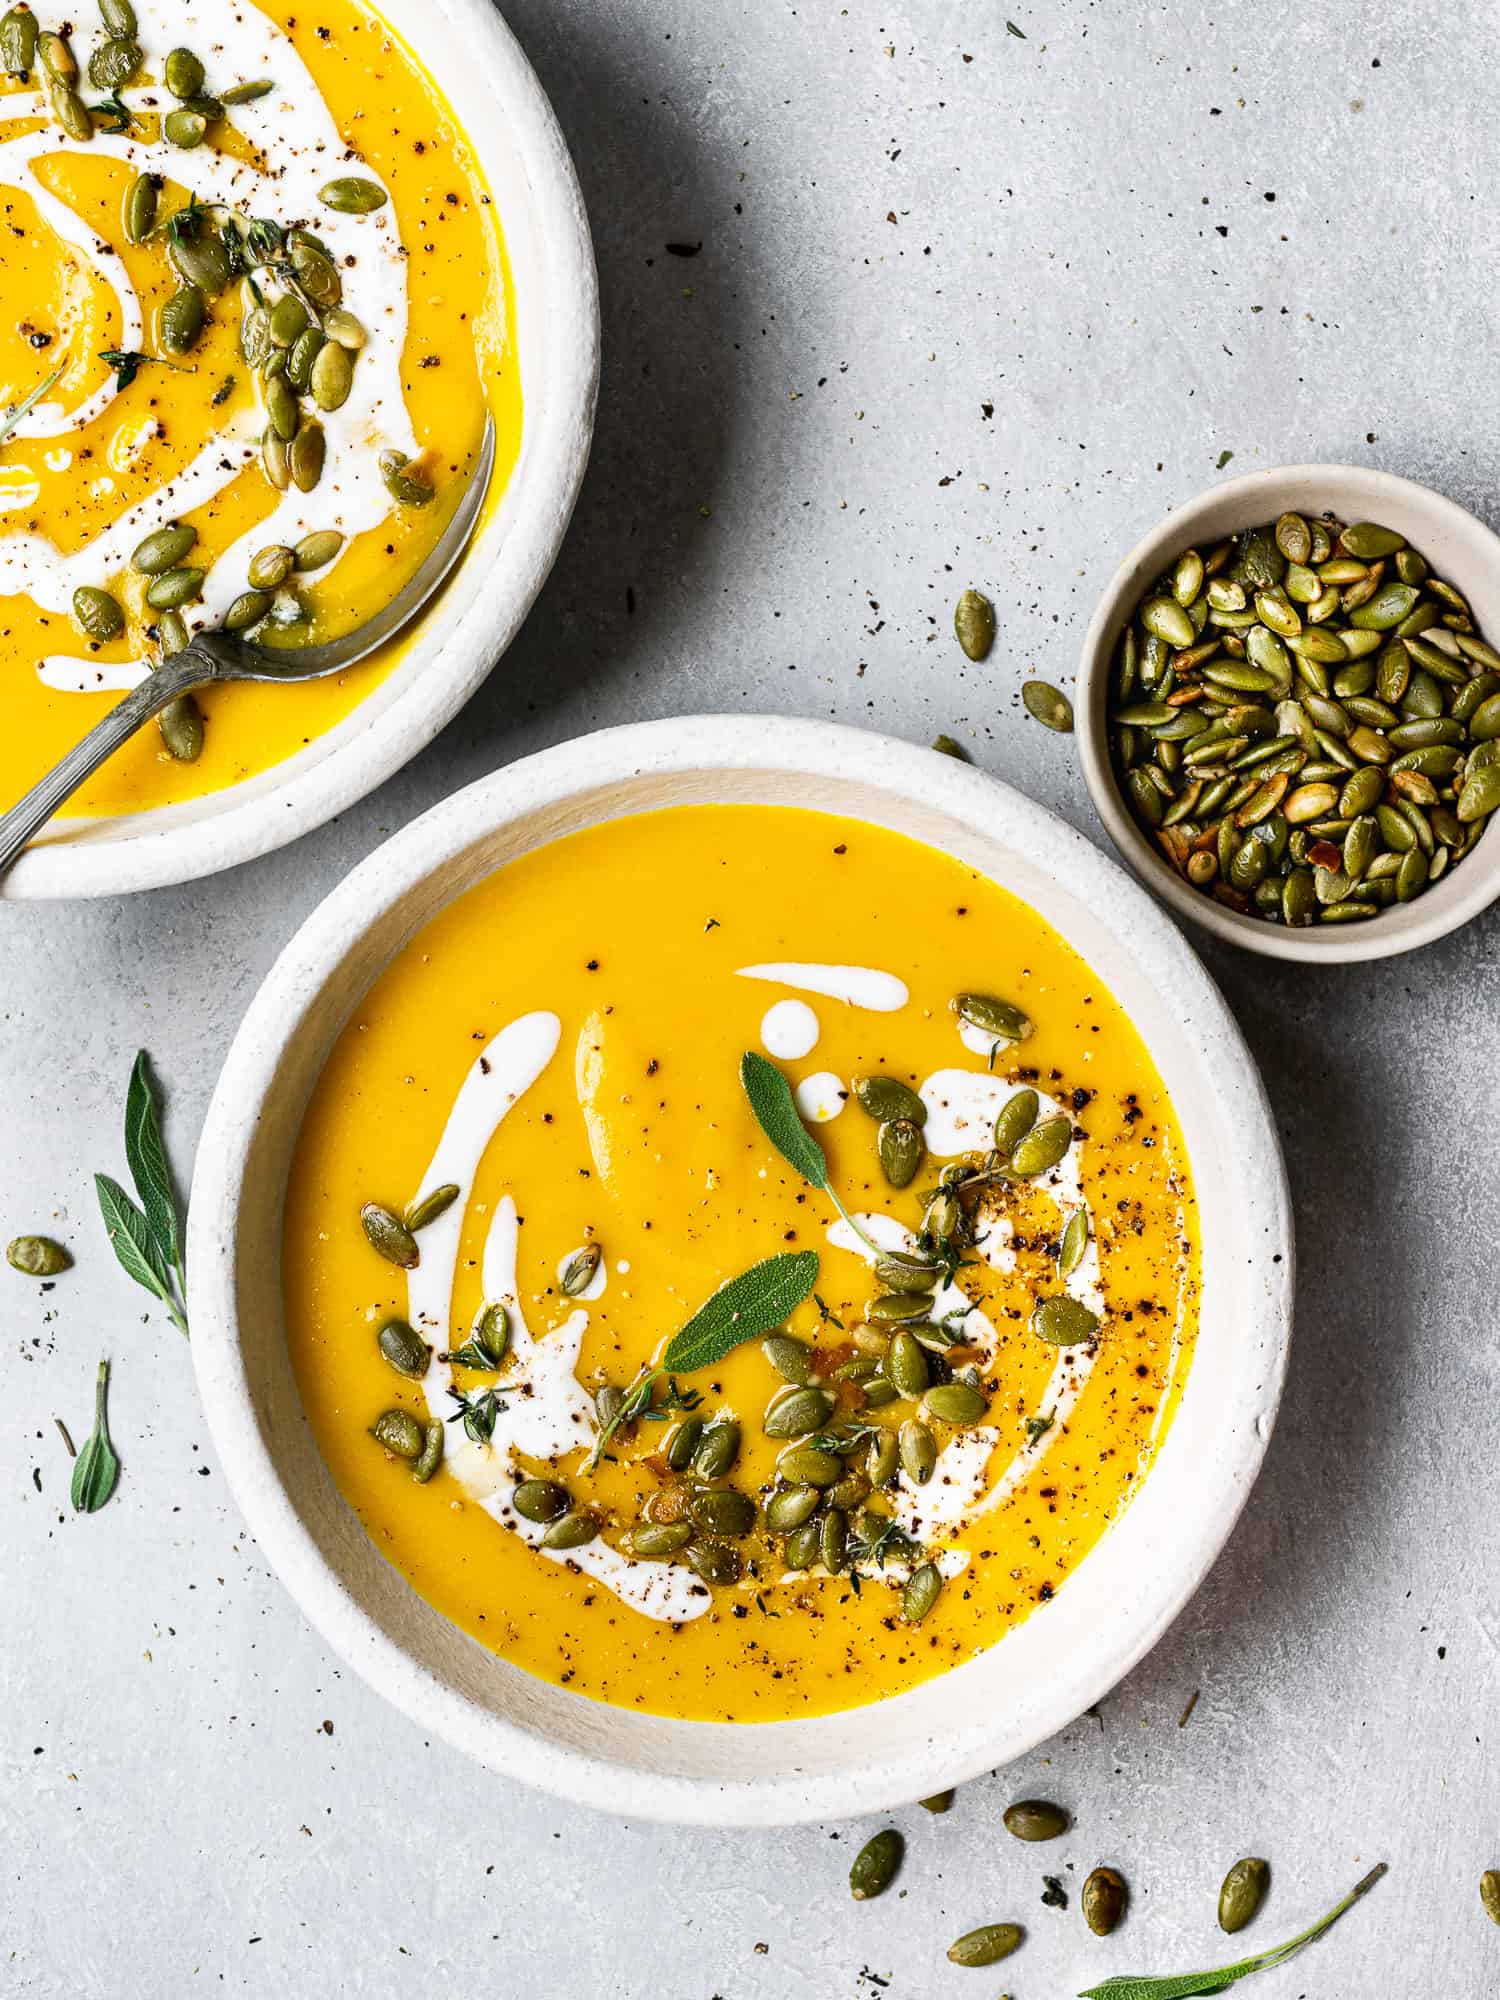 Butternut squash soup served in bowls and garnished with pepitas